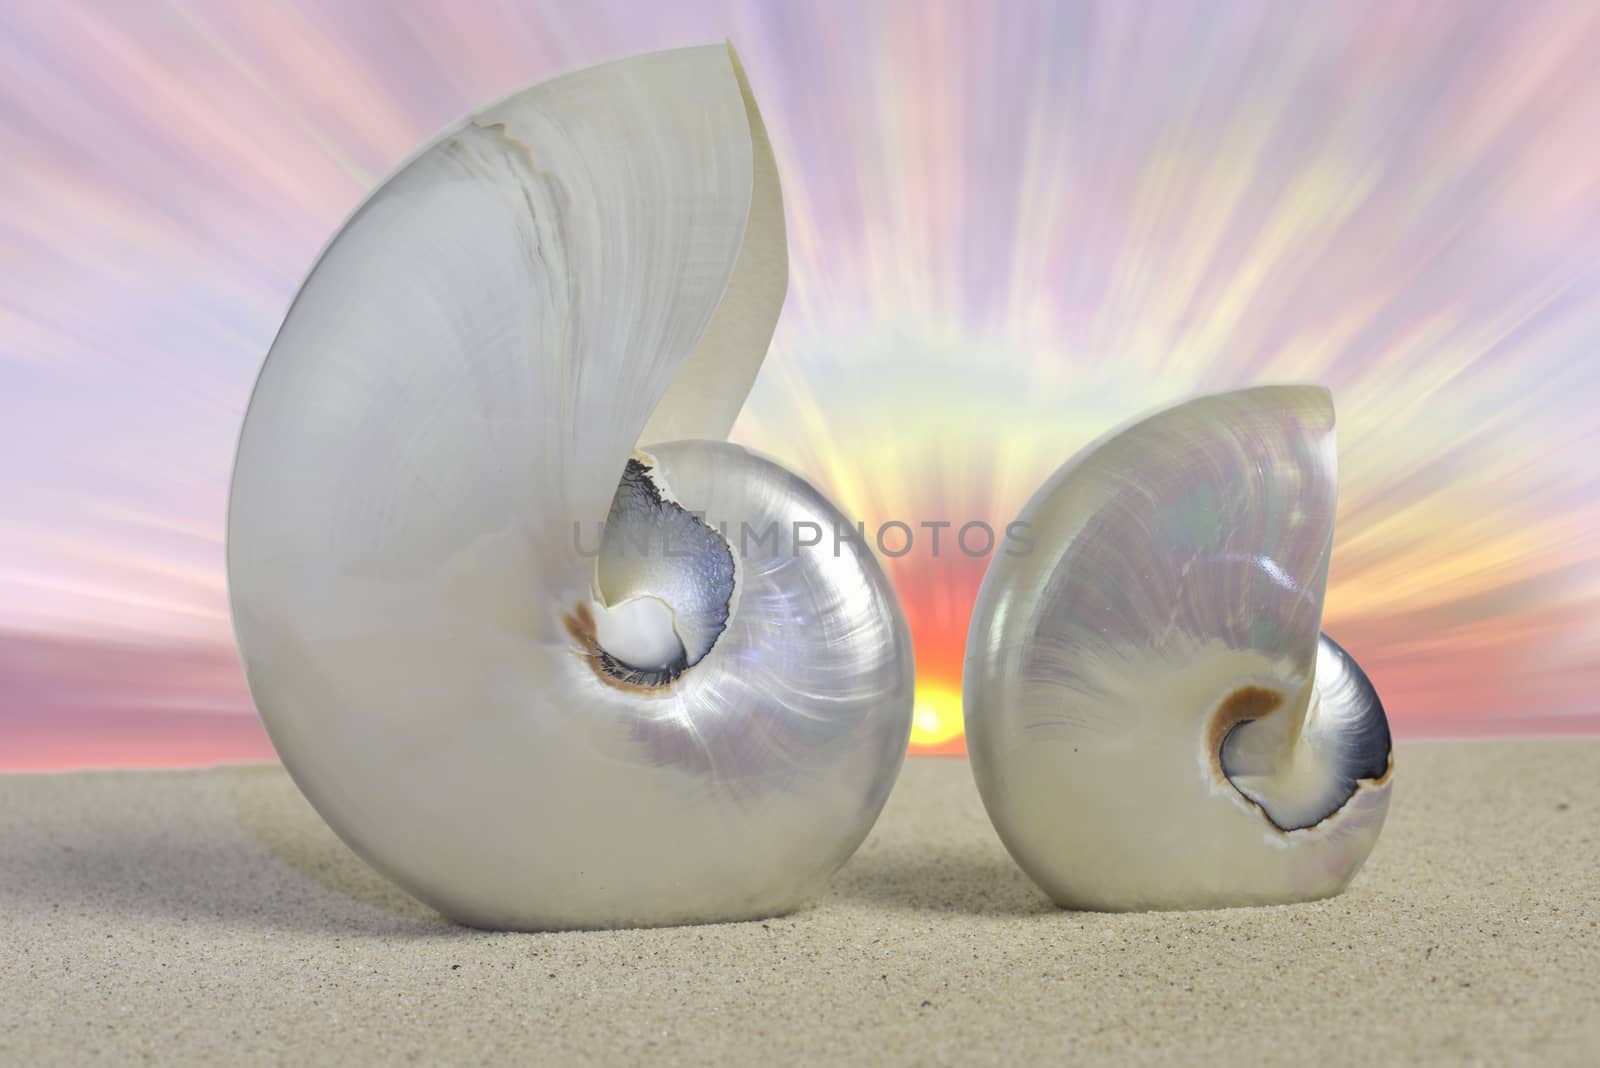 Nautilus shells on the beach during sunset